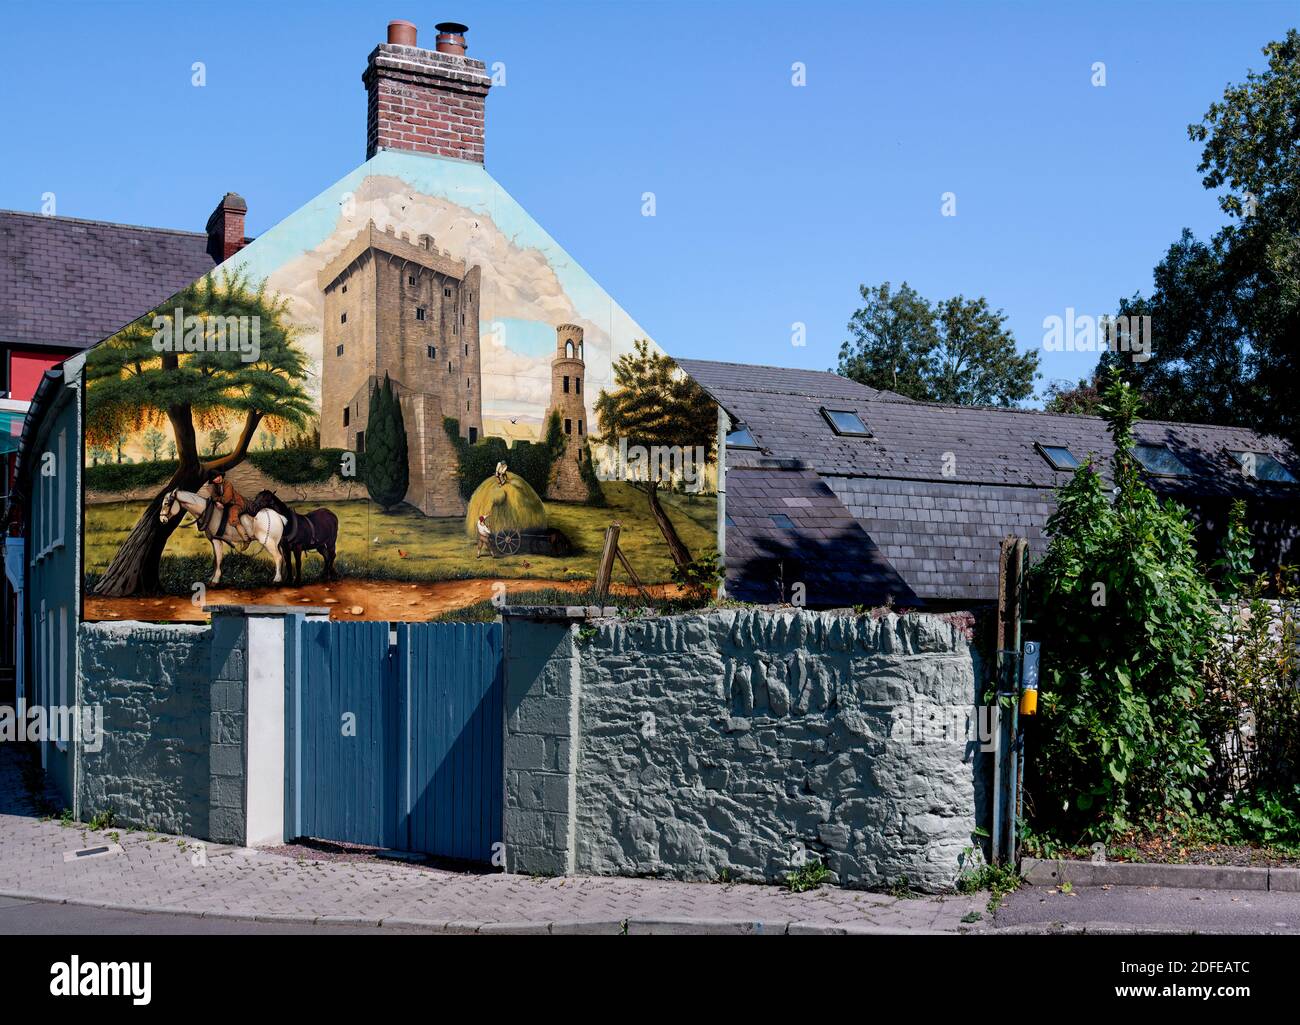 Medieval scene painted on Facade of the town house in county Cork, Ireland Stock Photo